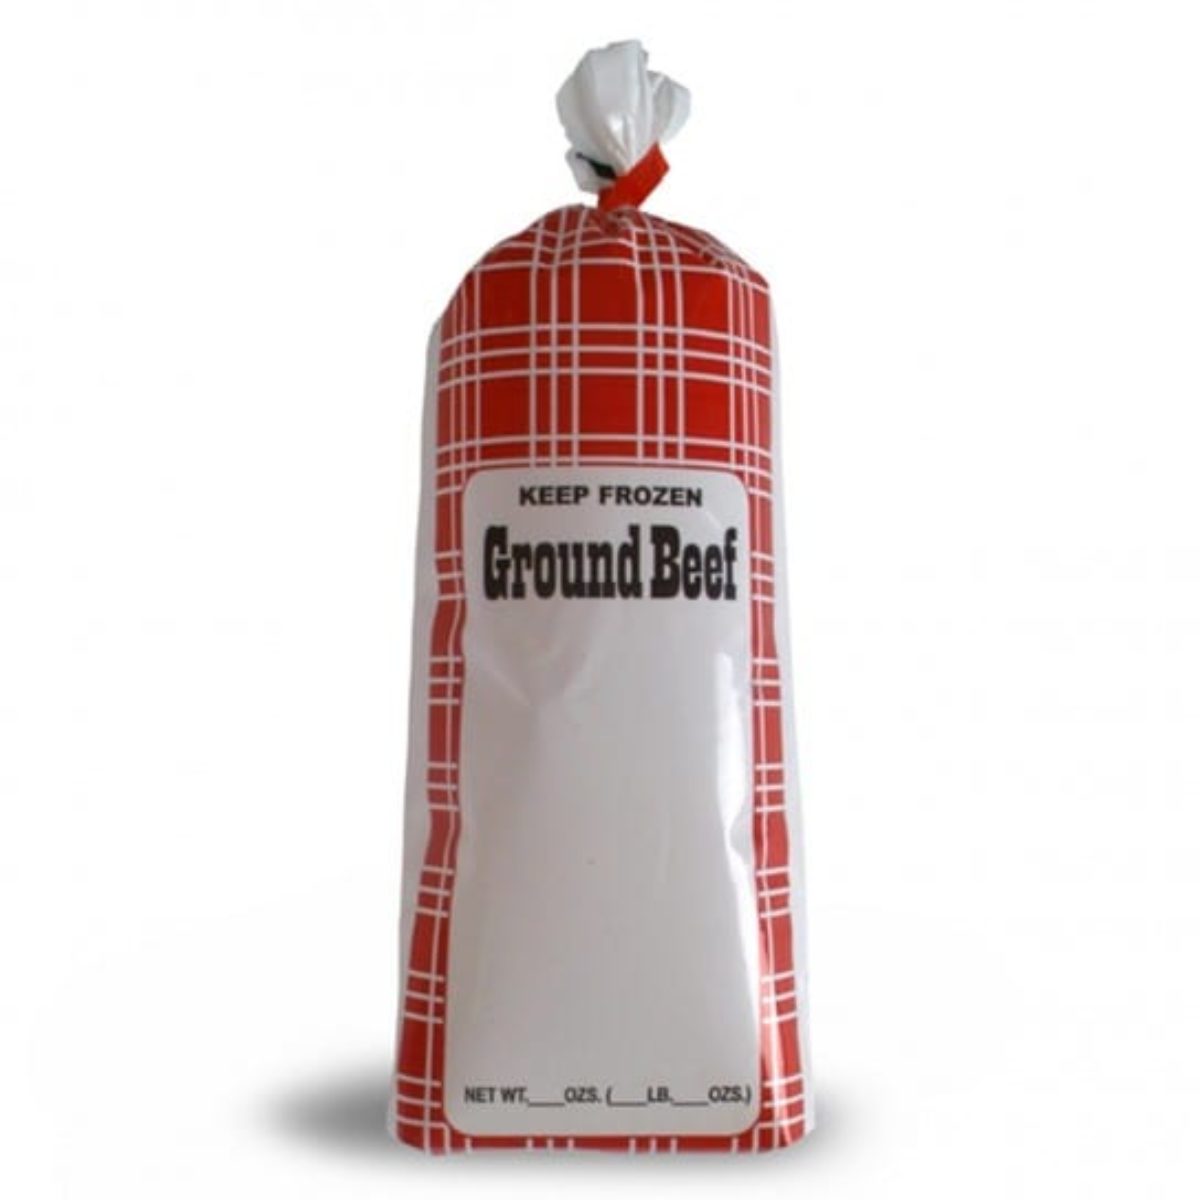 https://vacuumsealersunlimited.com/wp-content/uploads/Ground-Beef-bags-For-Sale-1200x1200.jpg